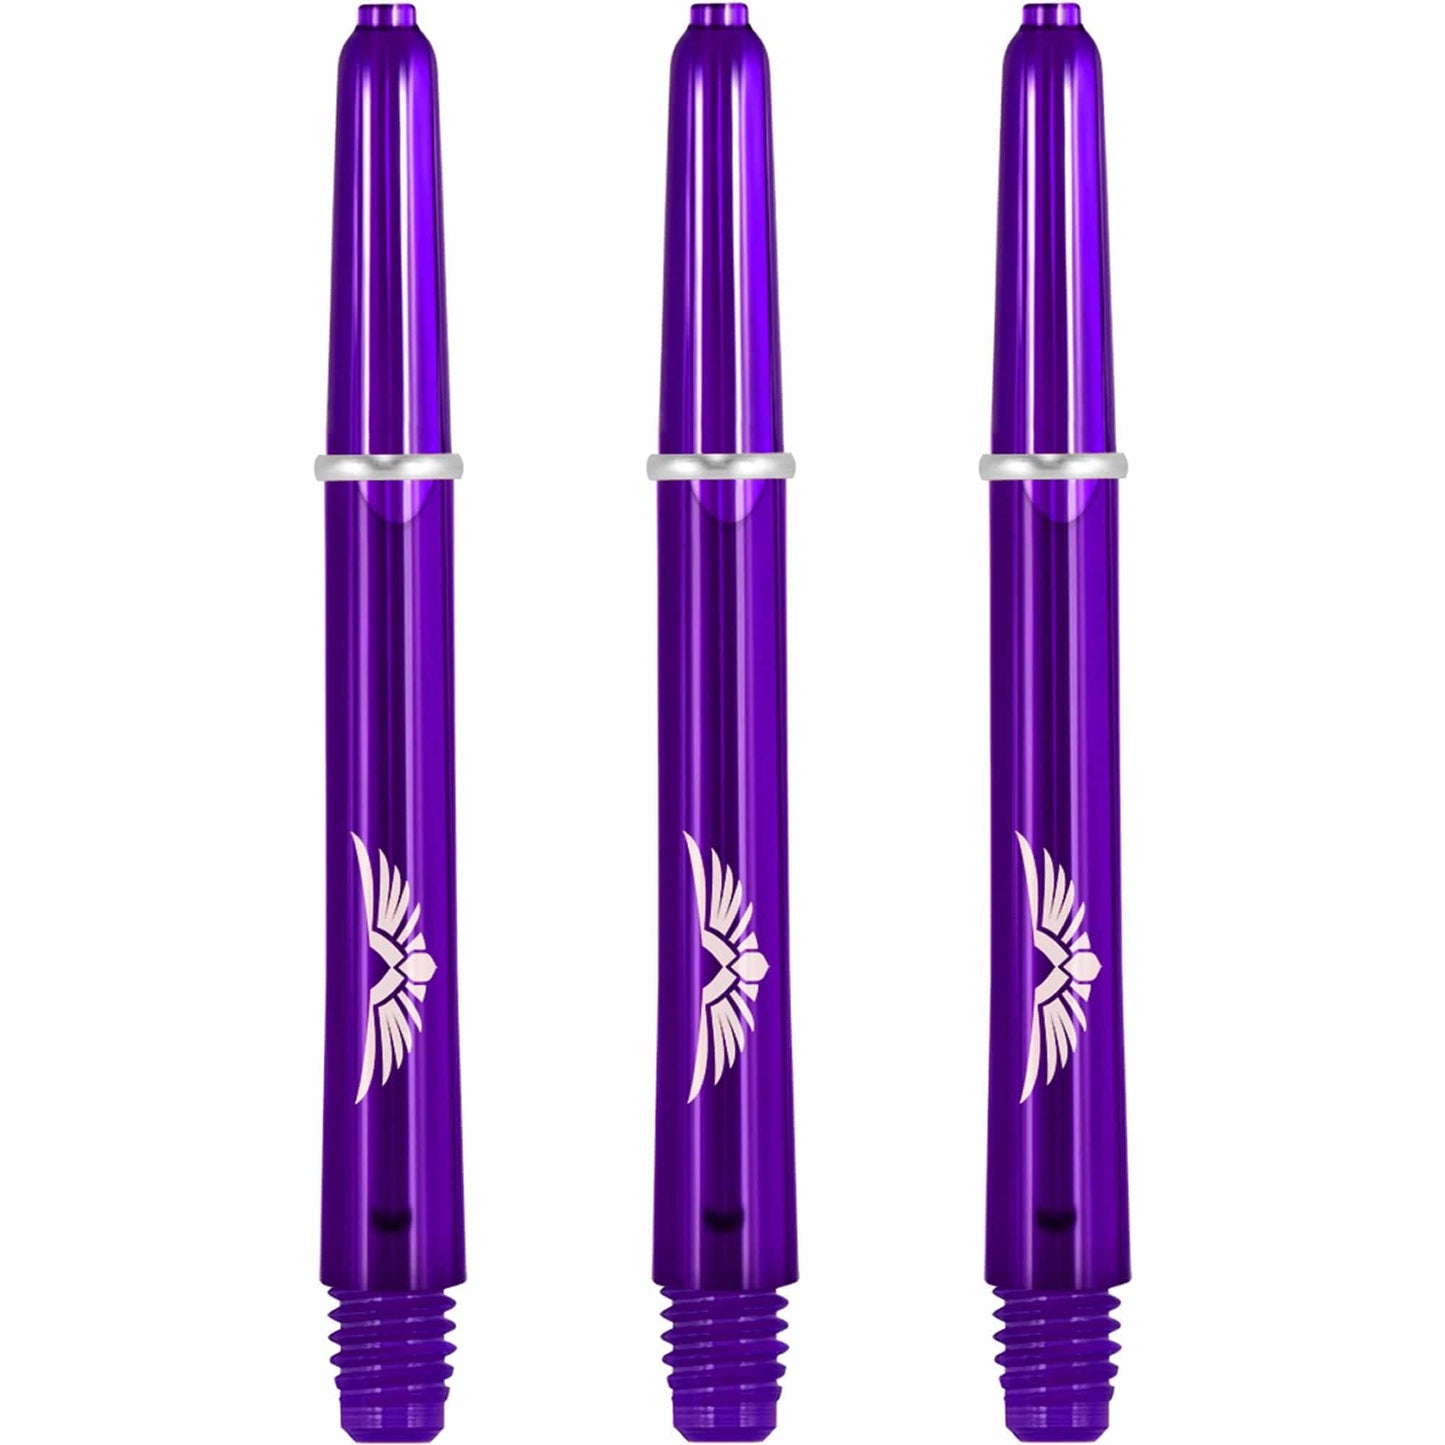 Shot Eagle Claw Dart Shafts - with Machined Rings - Strong Polycarbonate Stems - Purple Medium